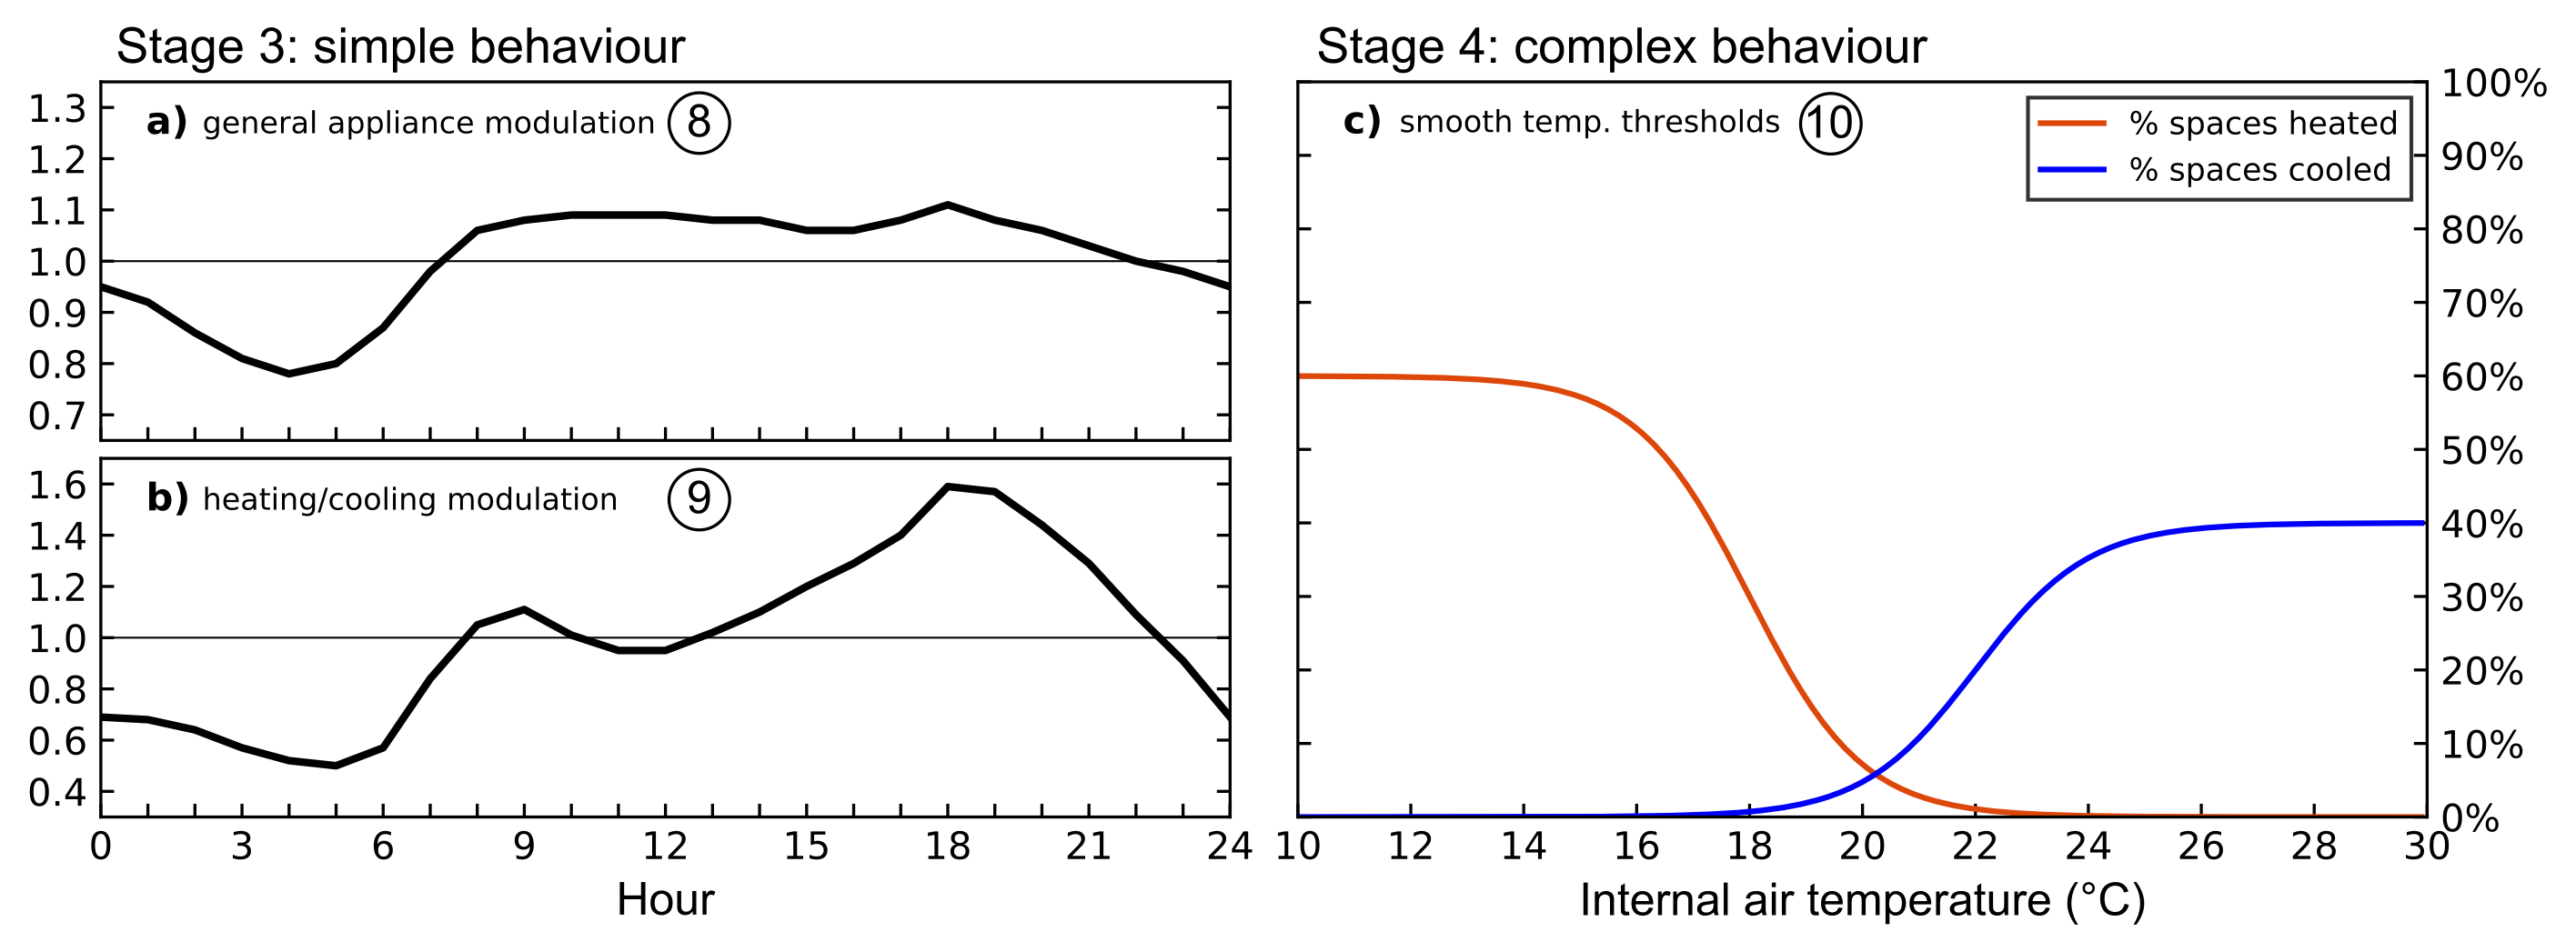 Later stages include energy use modulation terms to represent human behaviours. Stage 3 modulates behaviour over the diurnal cycle, Stage 4 modulates behaviour based on air temperatures to allow for a variety human tendencies to regulate temperature.